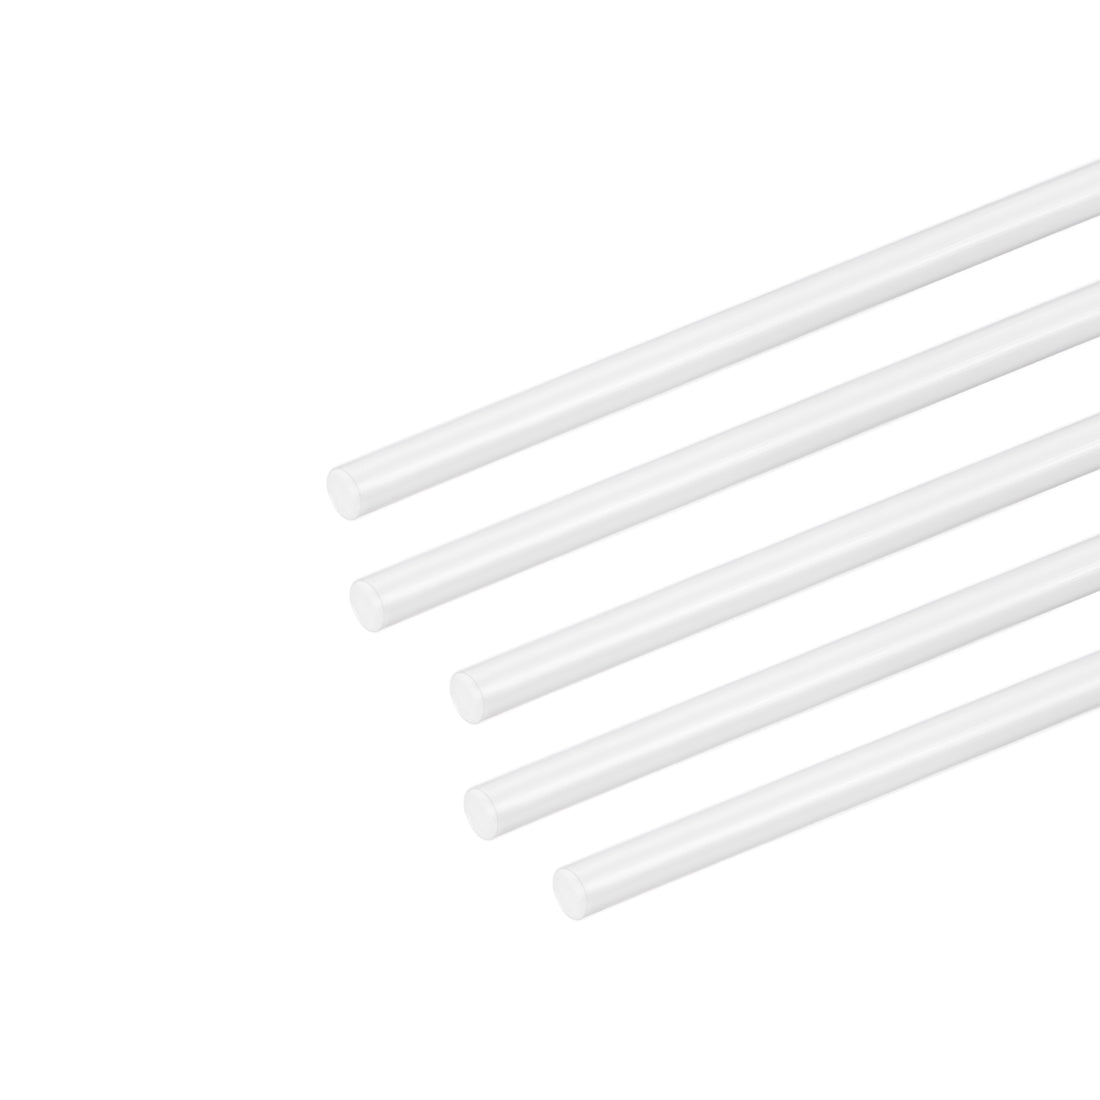 uxcell Uxcell 3mm × 20" ABS Plastic Round Bar Rod for Architectural Model Making DIY 5pcs